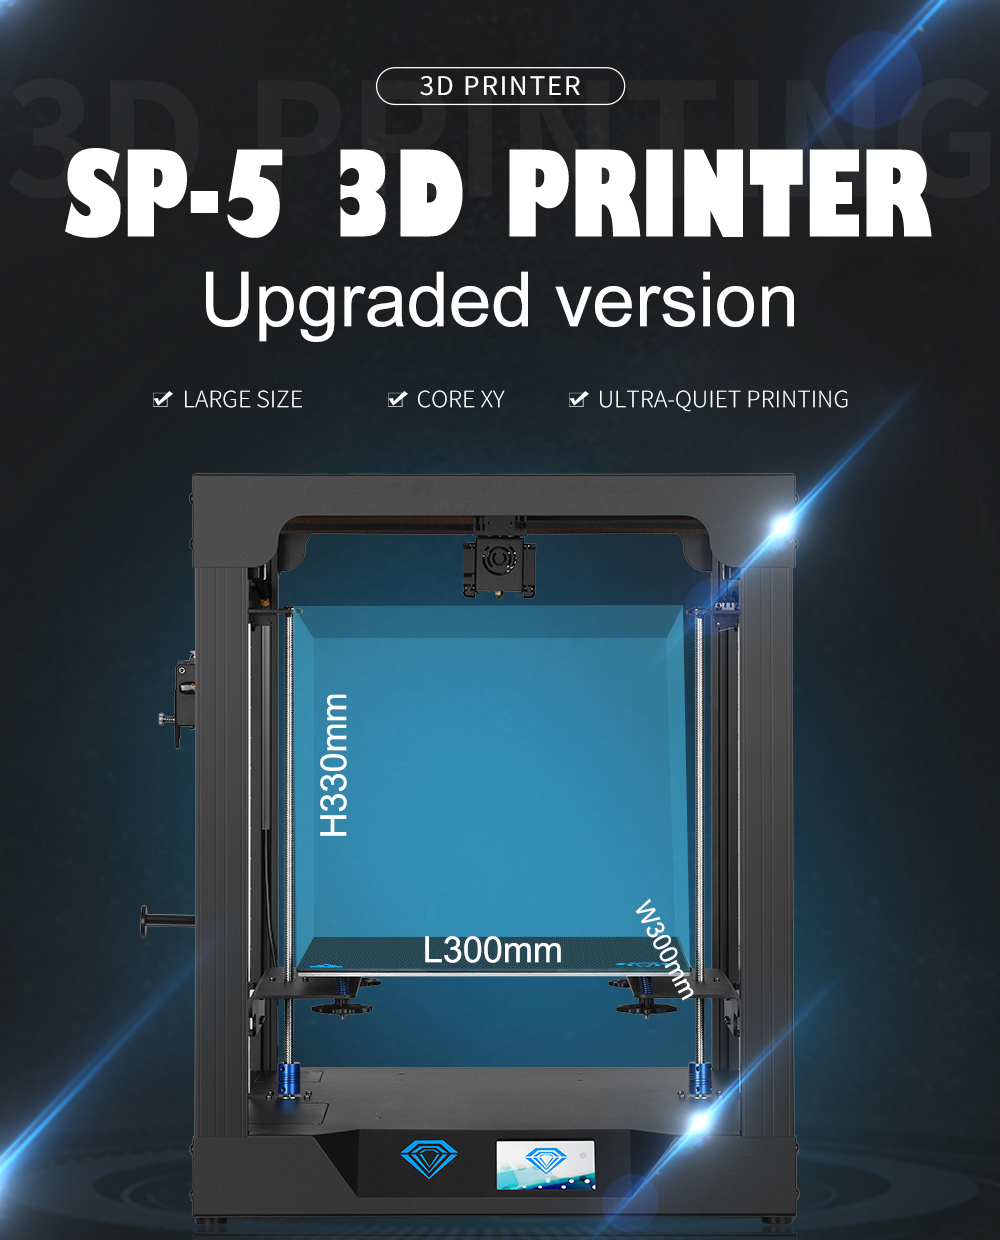 TWO-TREESreg-SP-5-Core-XY-300300350mm-Printing-Size-3D-Printer-With-Full-Metal-BodyDouble-Linear-Gui-1630366-2